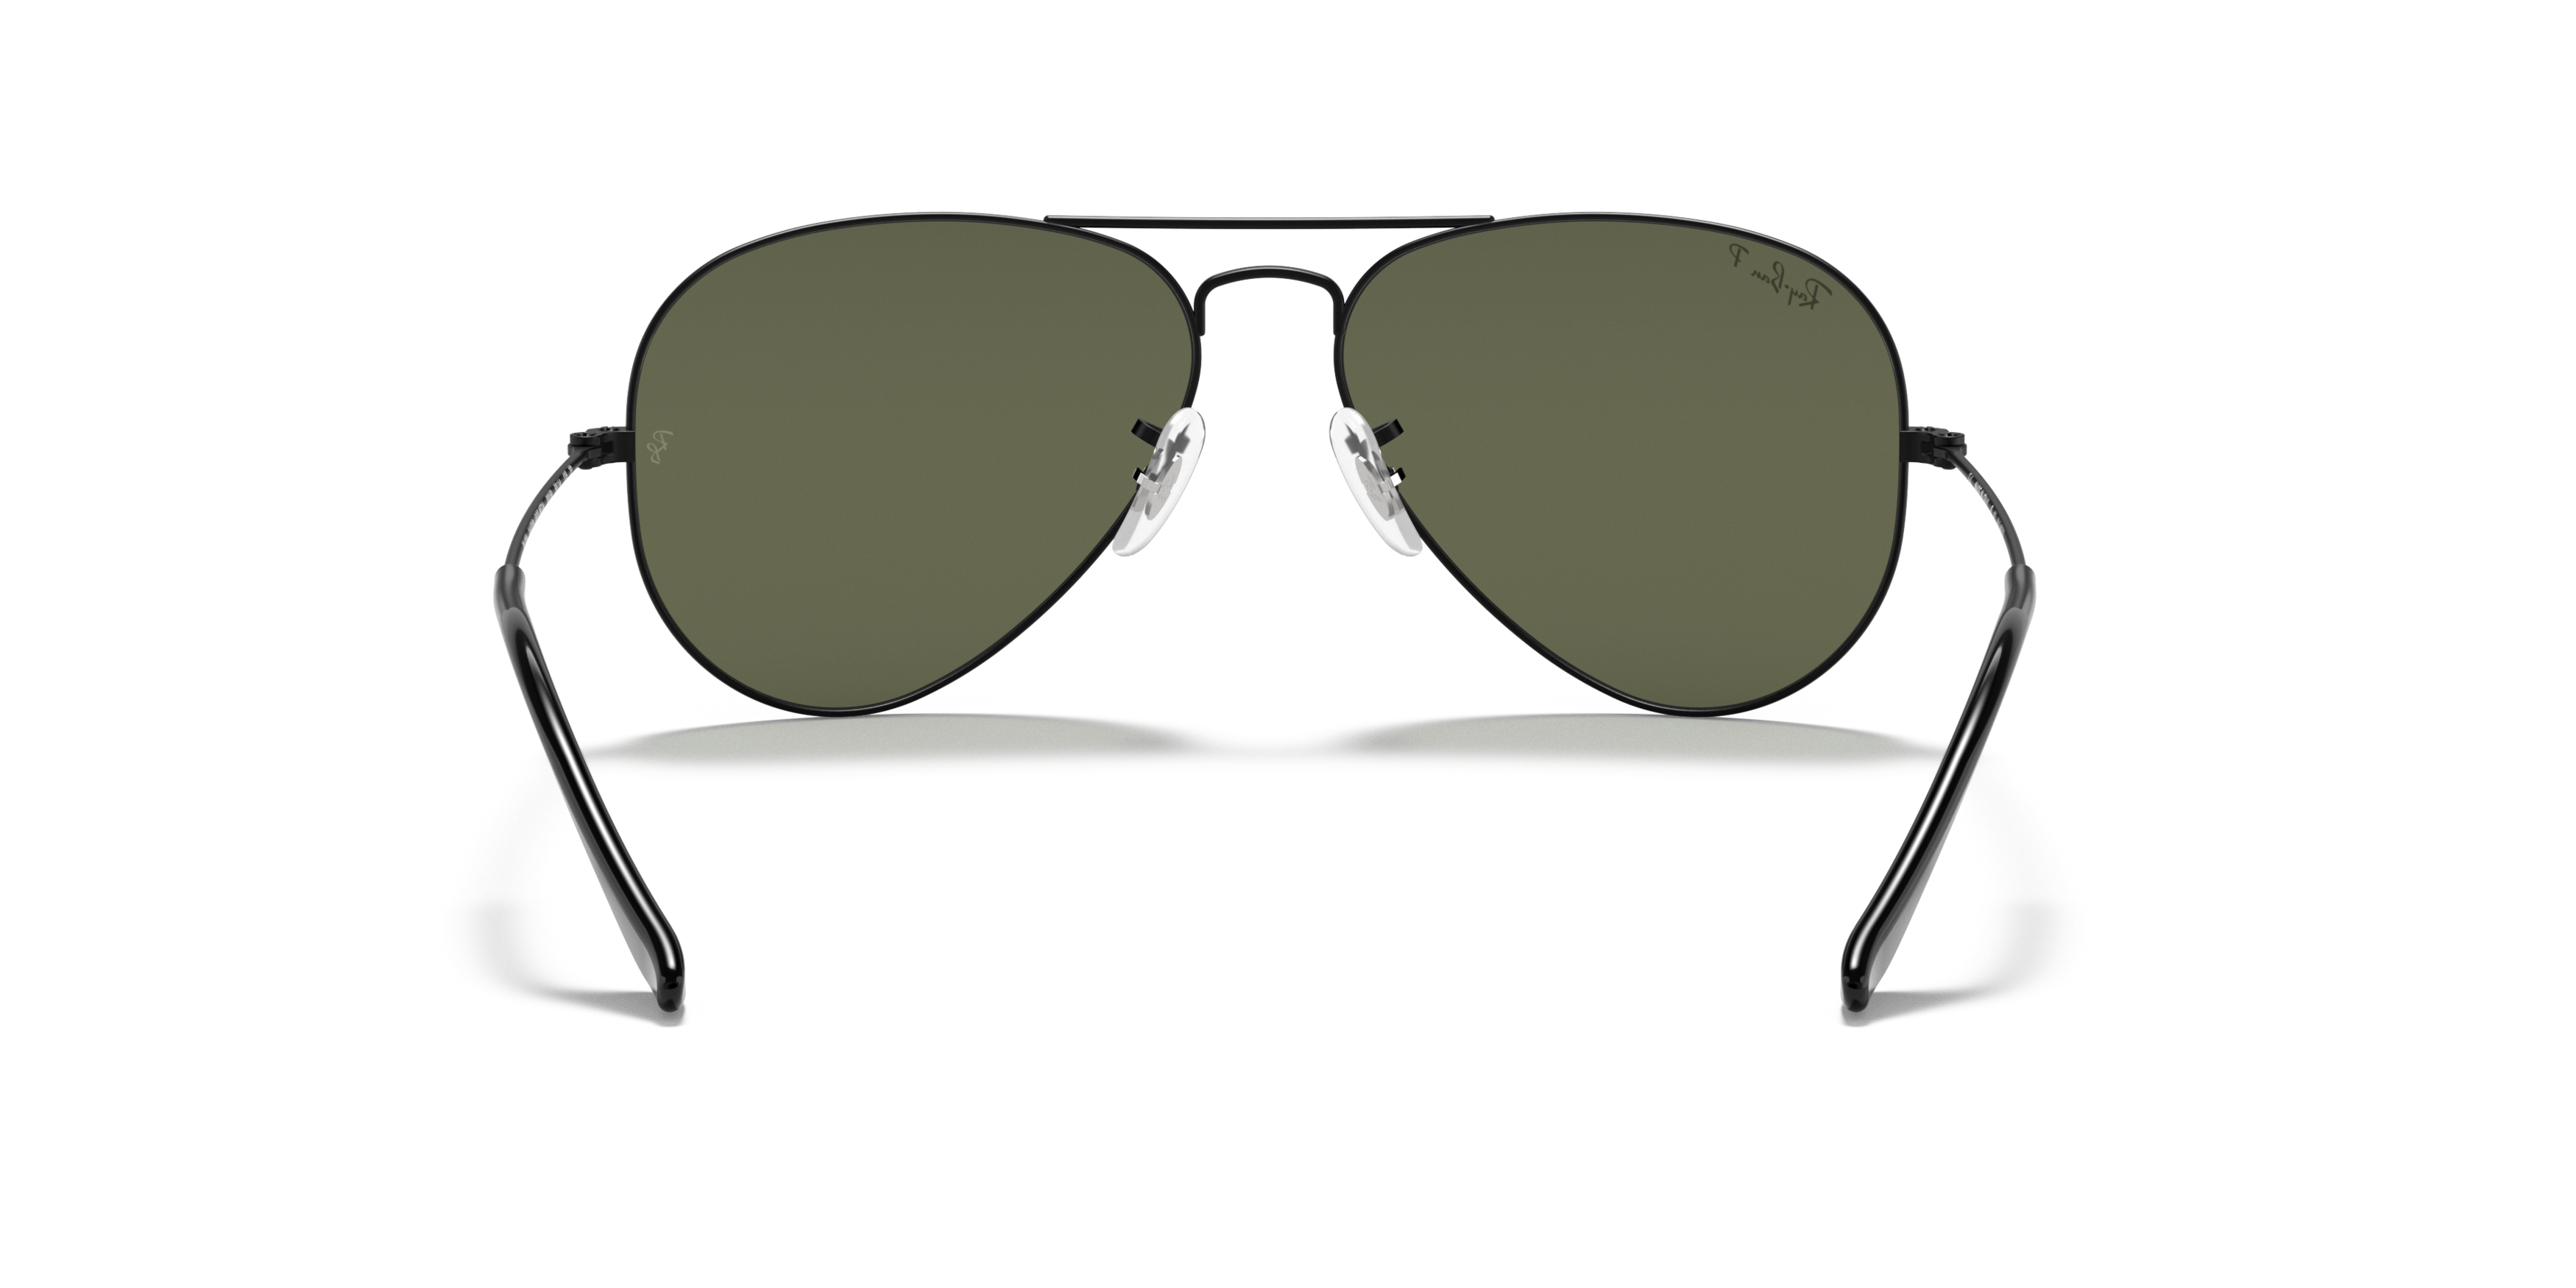 [products.image.detail02] Ray-Ban Aviator Gradient RB3025 002/58